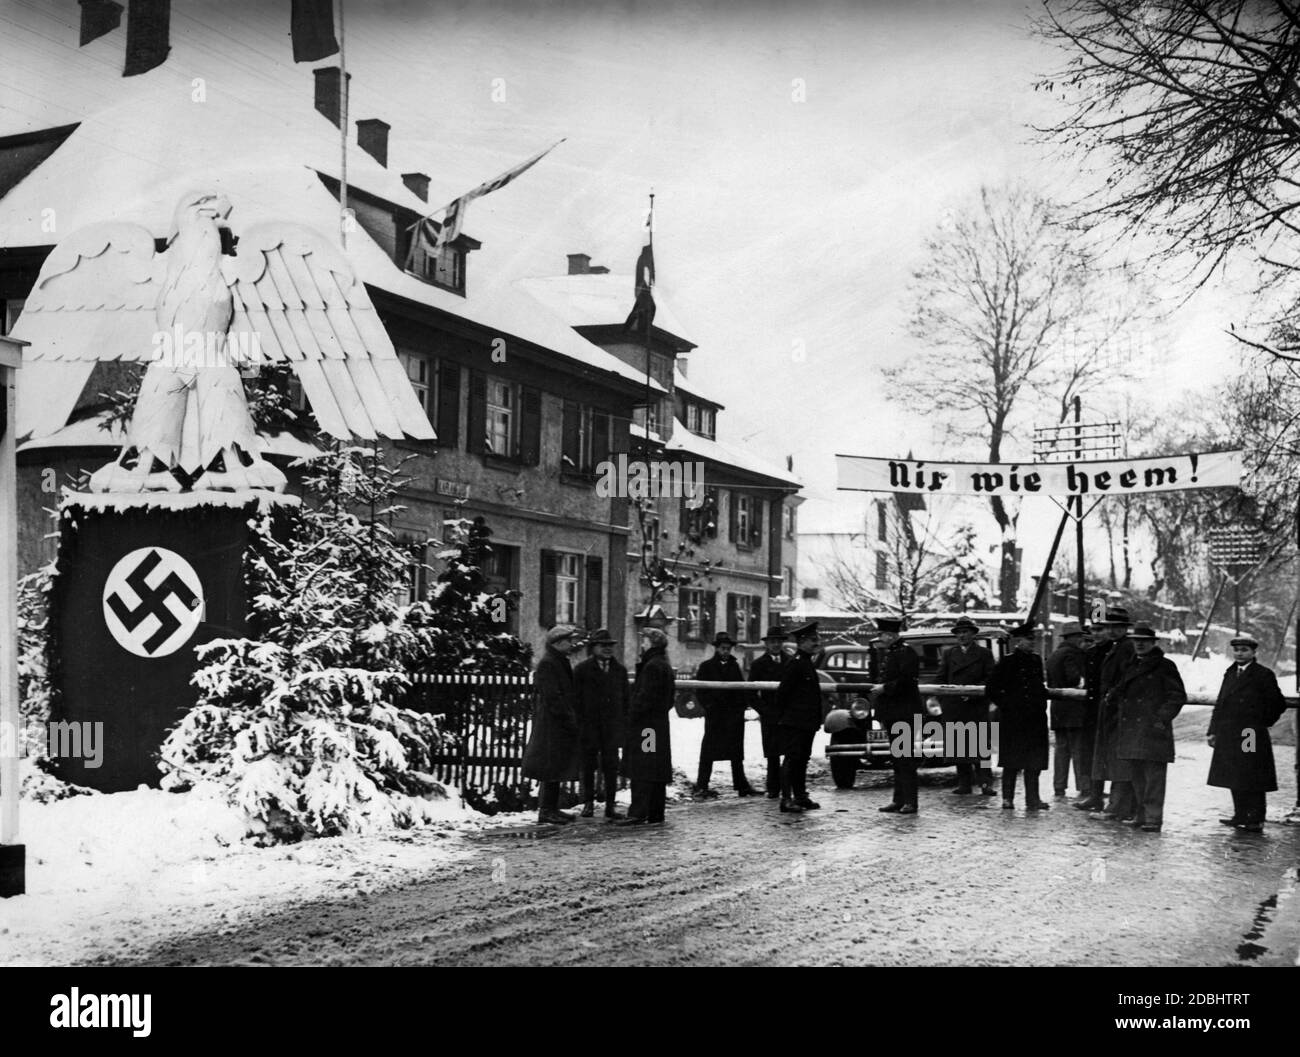 'Officials and passers-by talk at the border of Saarland. On the left, the Reichsadler (imperial eagle) standing above a swastika. On the right there is a banner stretched across the street with the writing ''Nix wie heem!''' Stock Photo